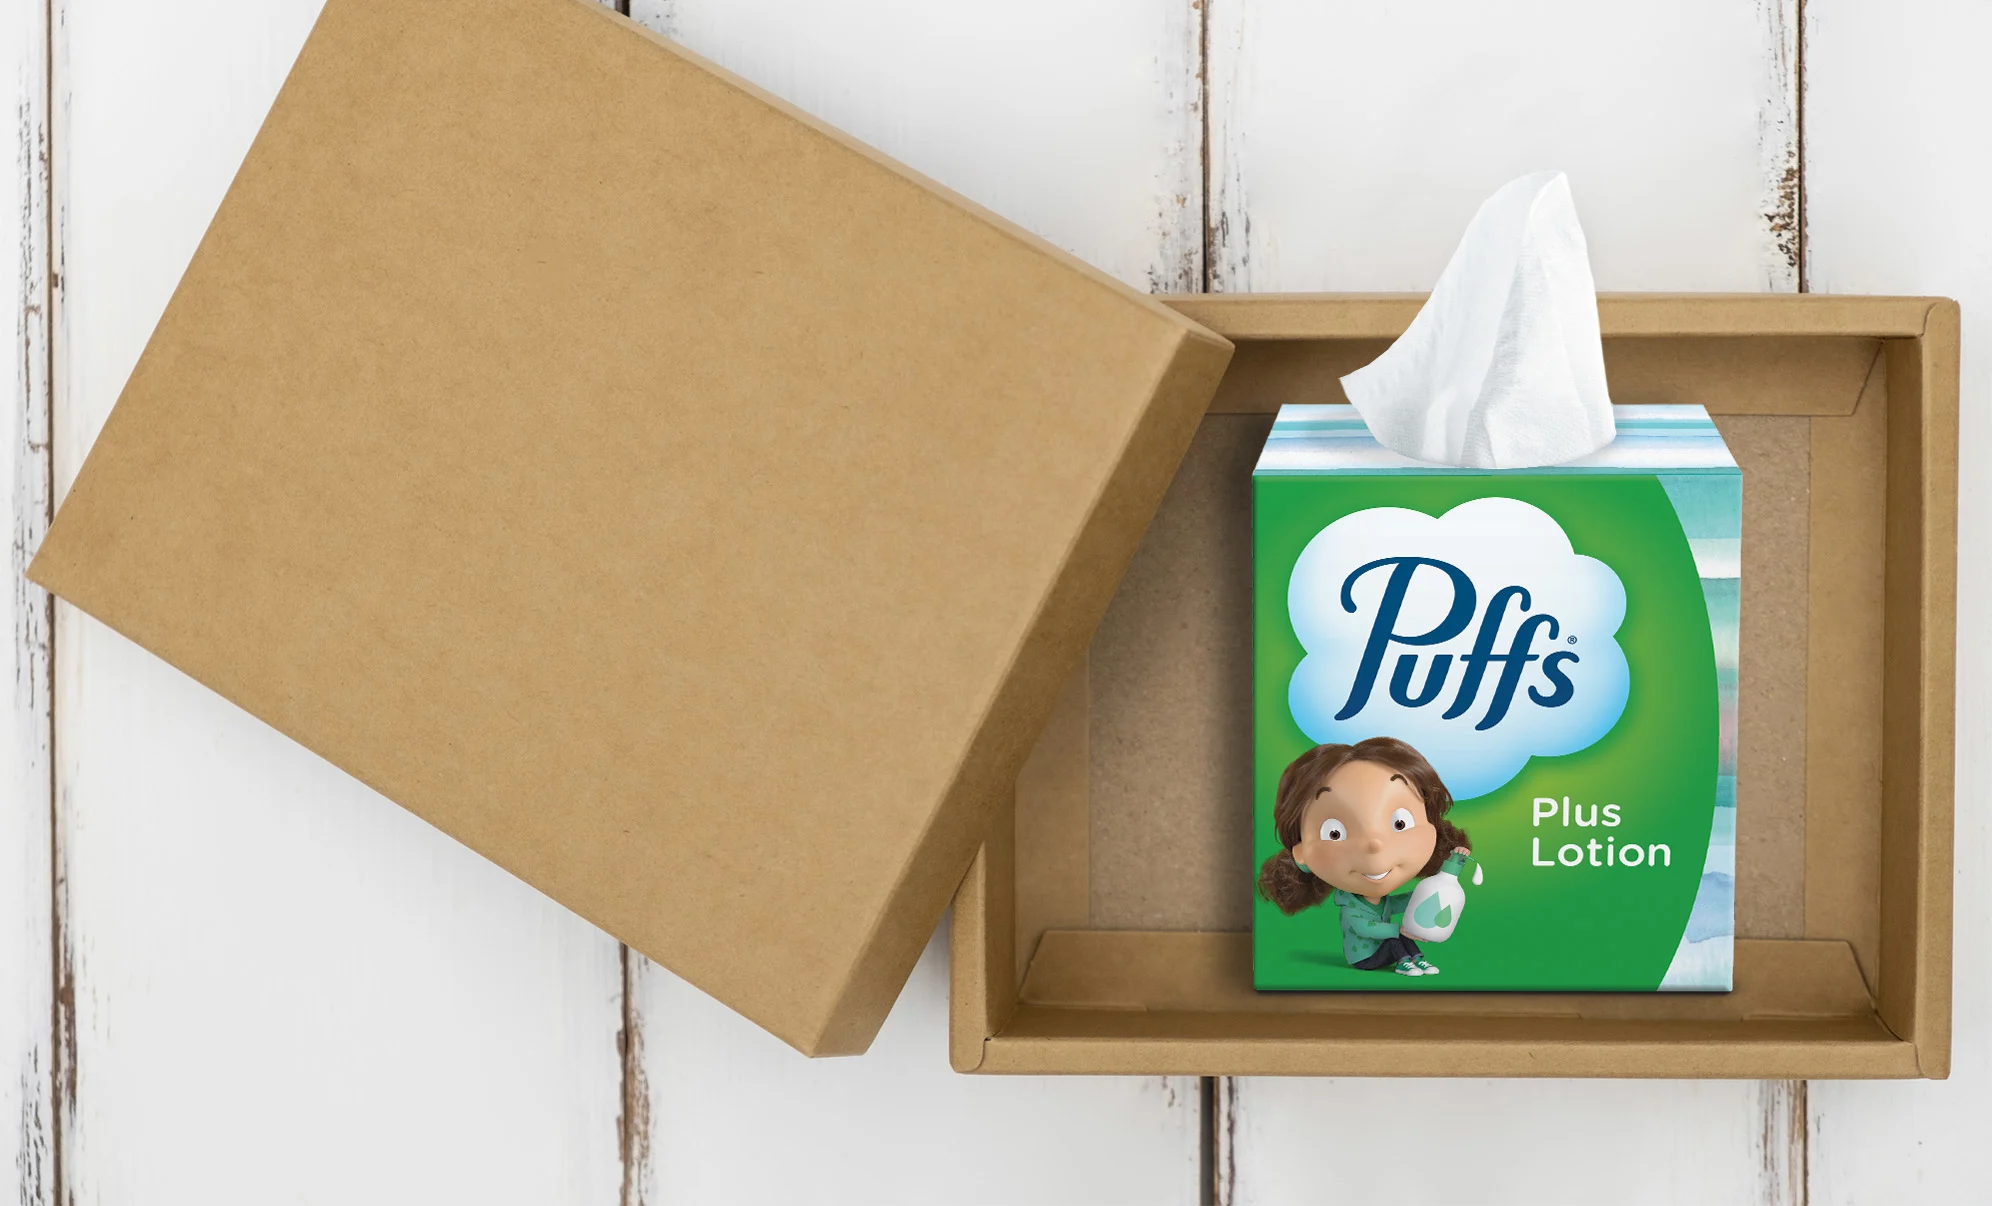 Puffs Plus Lotion box of tissues sitting on the table